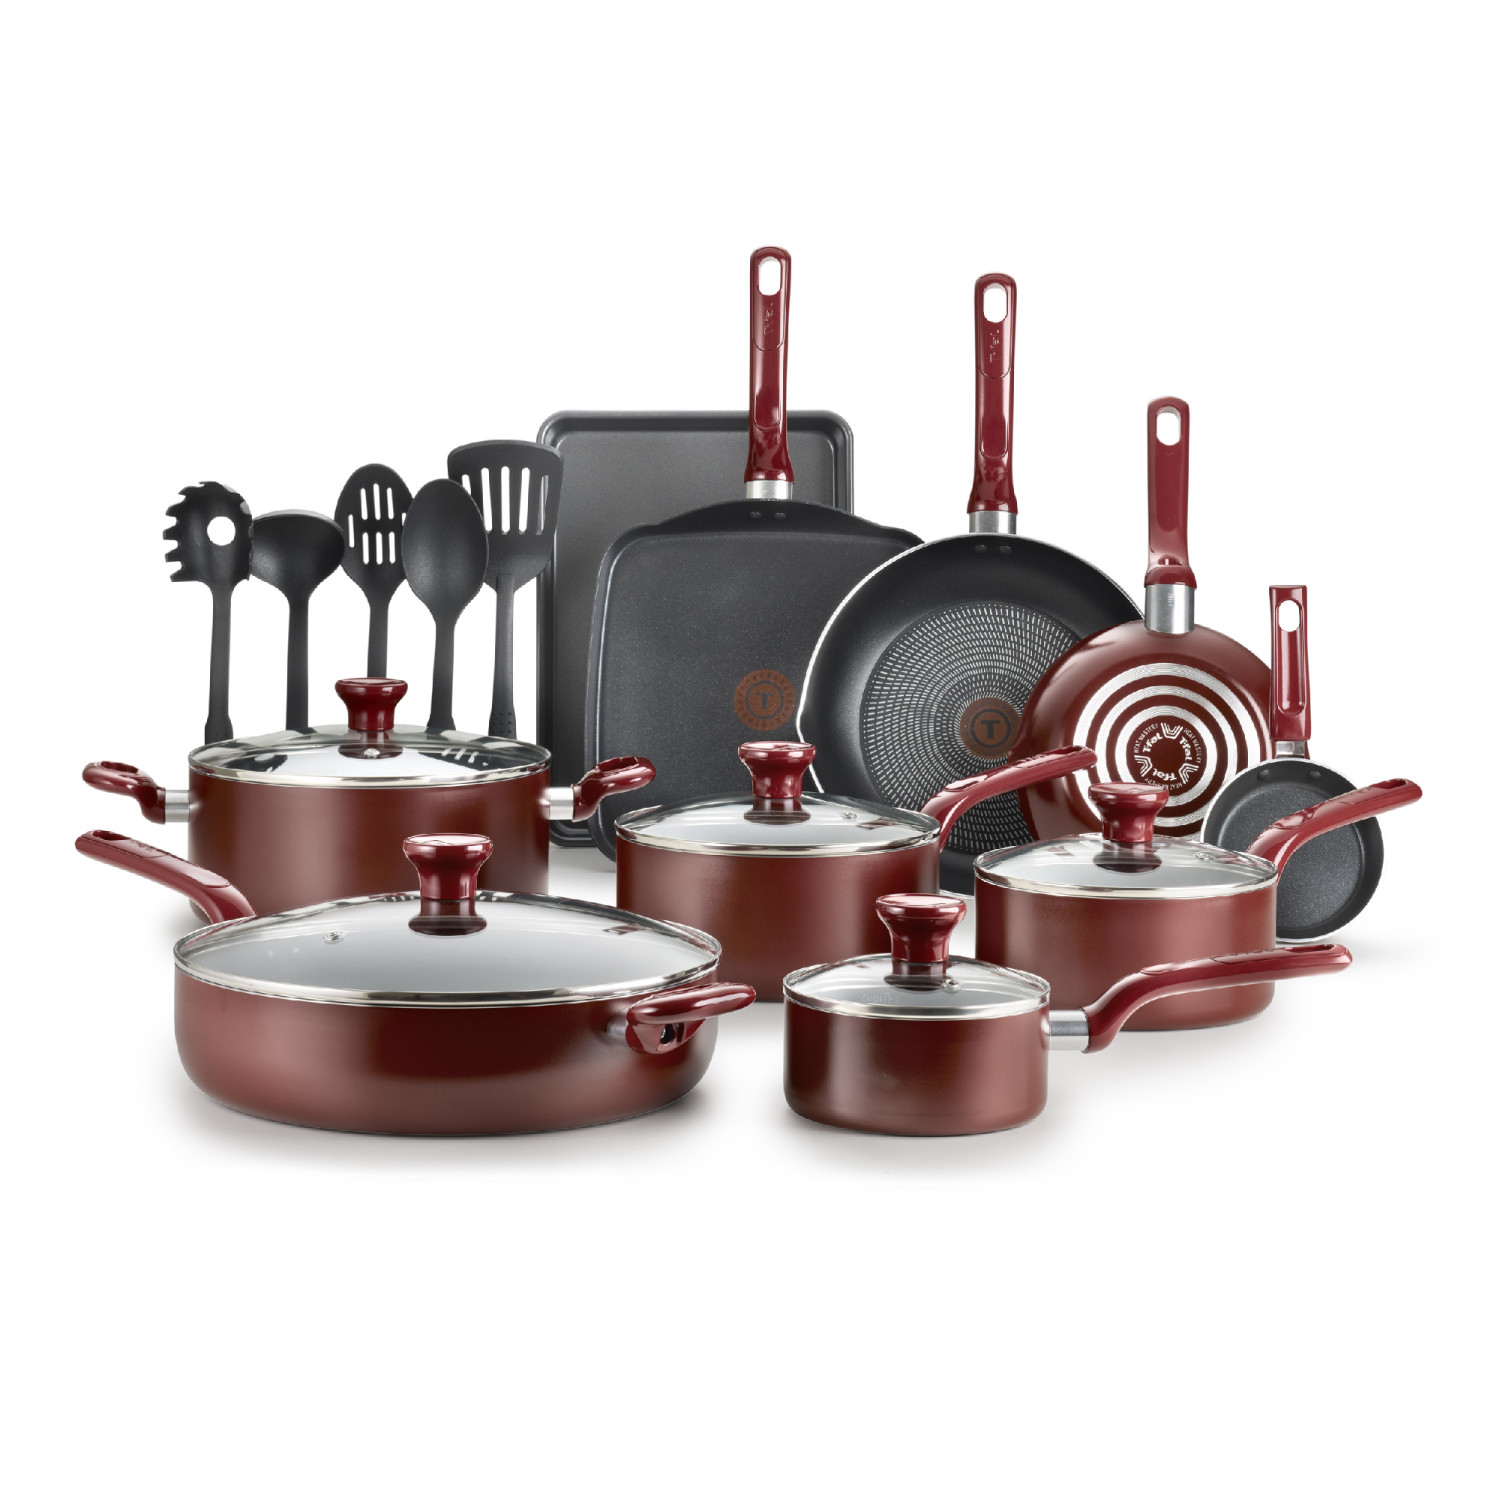 T-fal Easy Care Nonstick Cookware, 20 Piece Set, Red - image 1 of 10